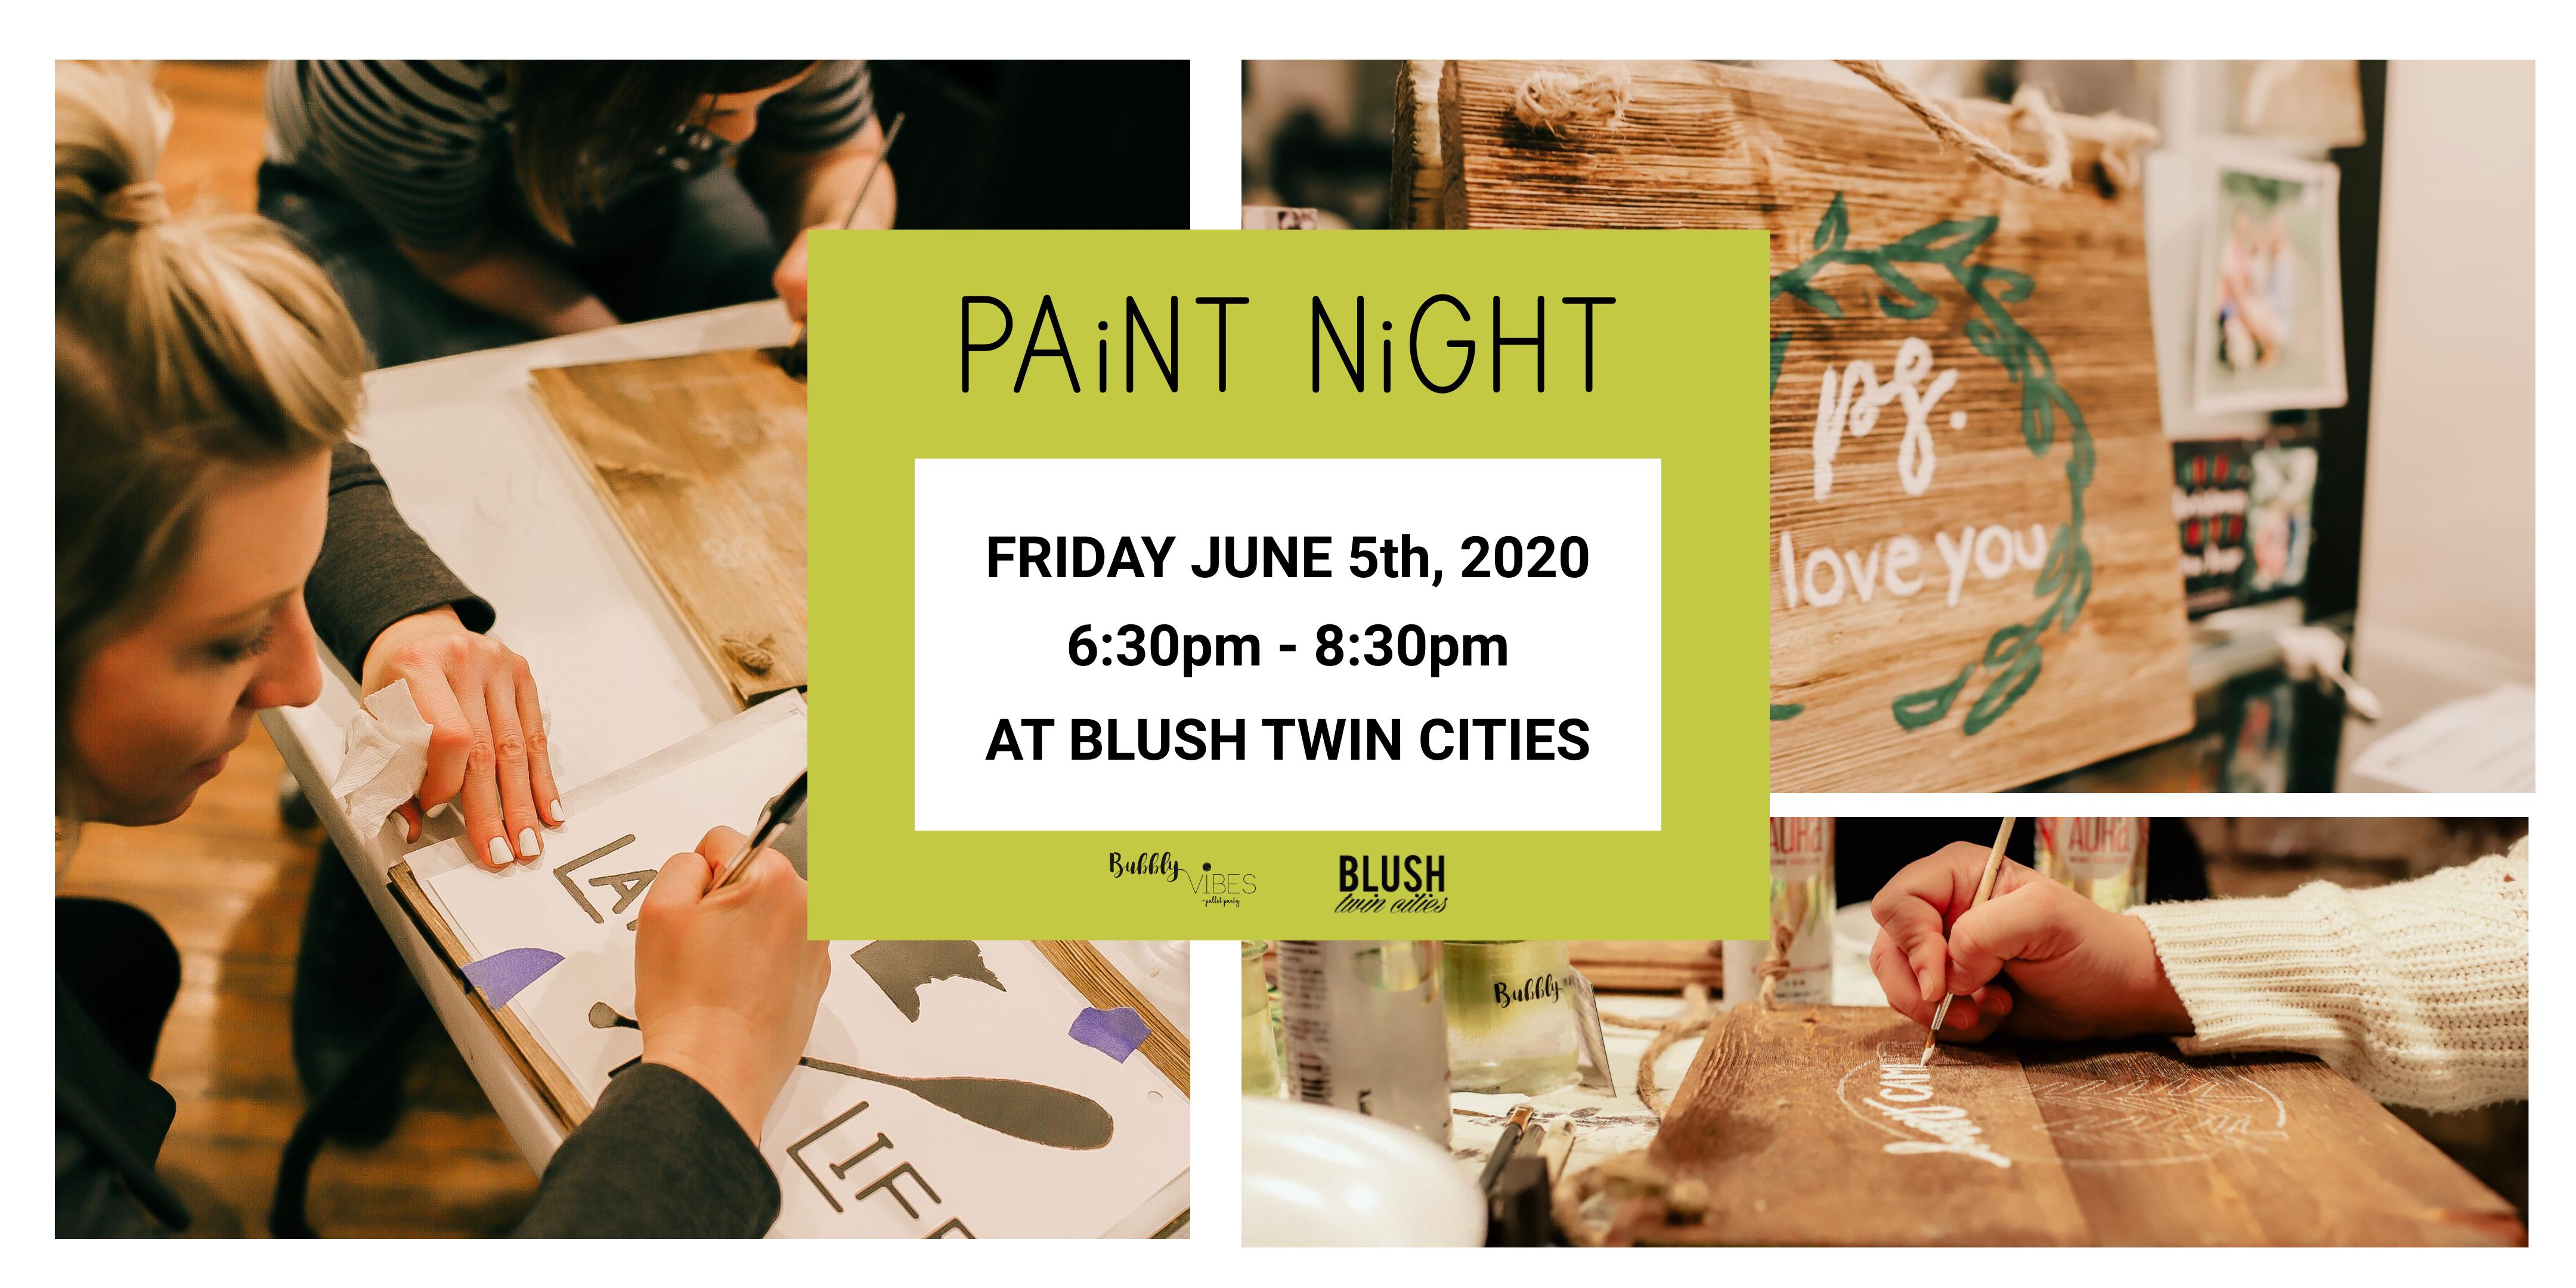 Paint Night Workshop at Blush Twin Cities Boudoir Photography